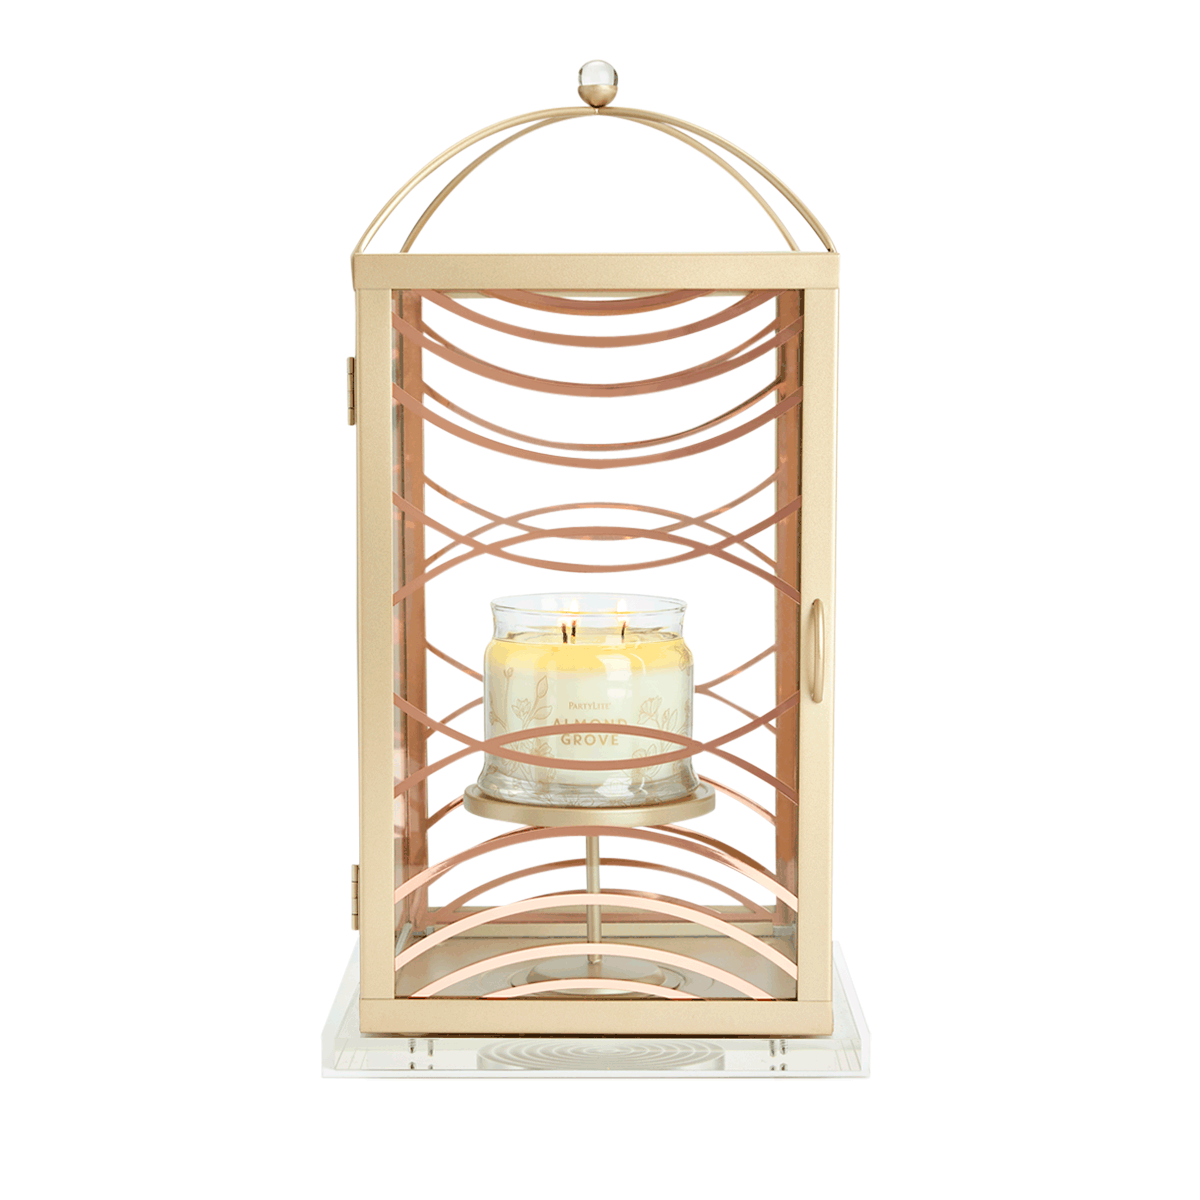 Curved Lines Lantern - Large - PartyLite US